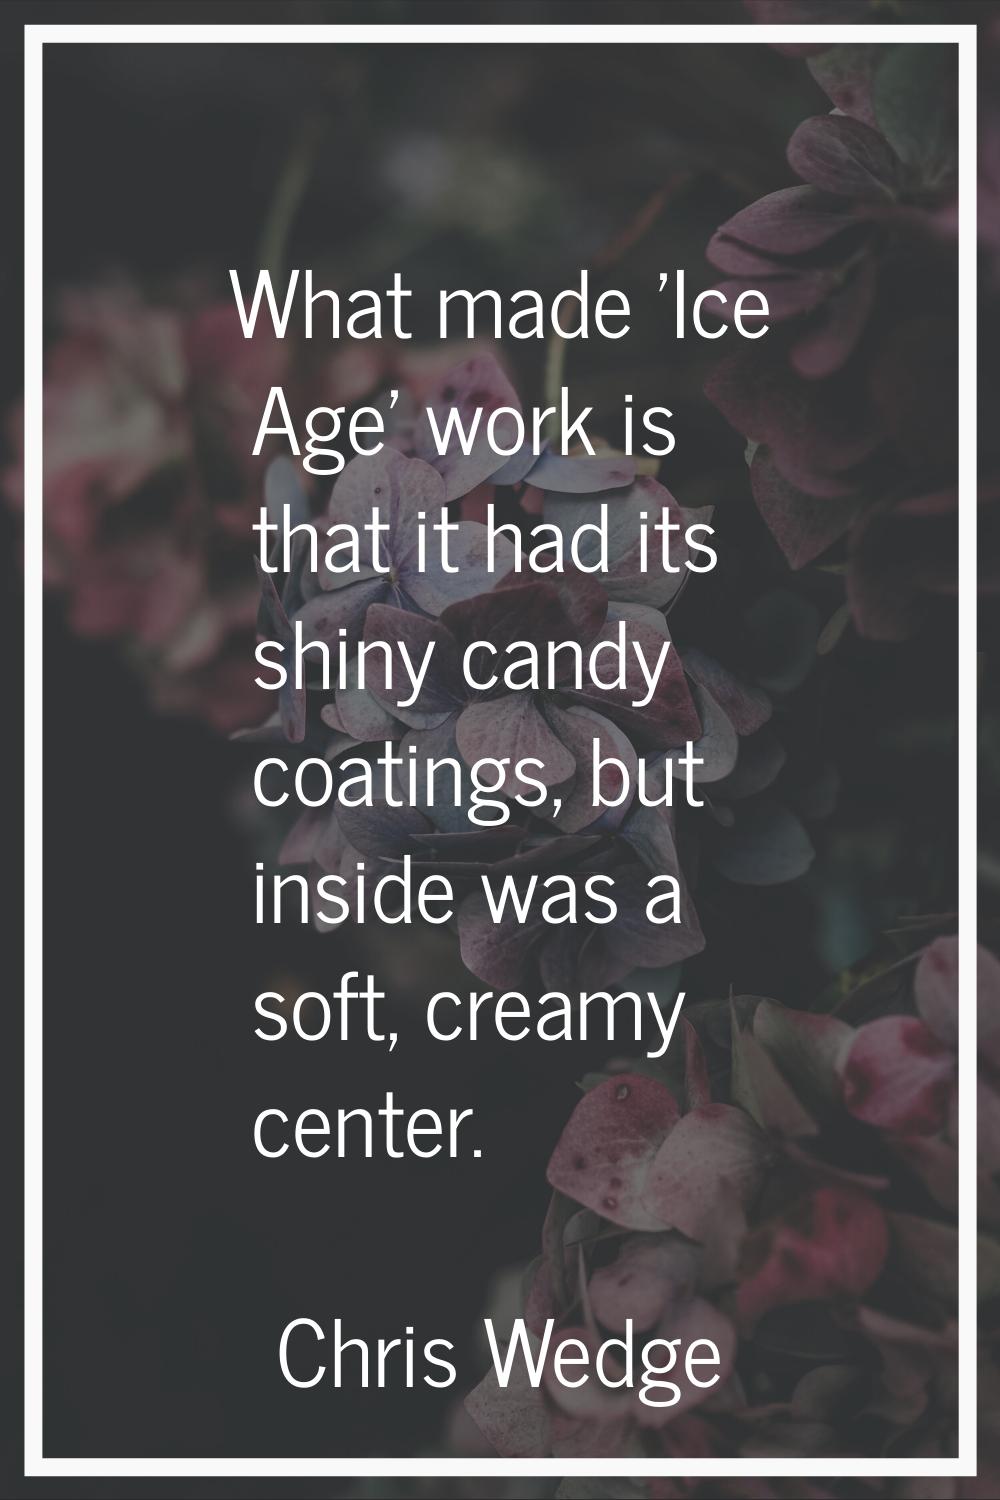 What made 'Ice Age' work is that it had its shiny candy coatings, but inside was a soft, creamy cen